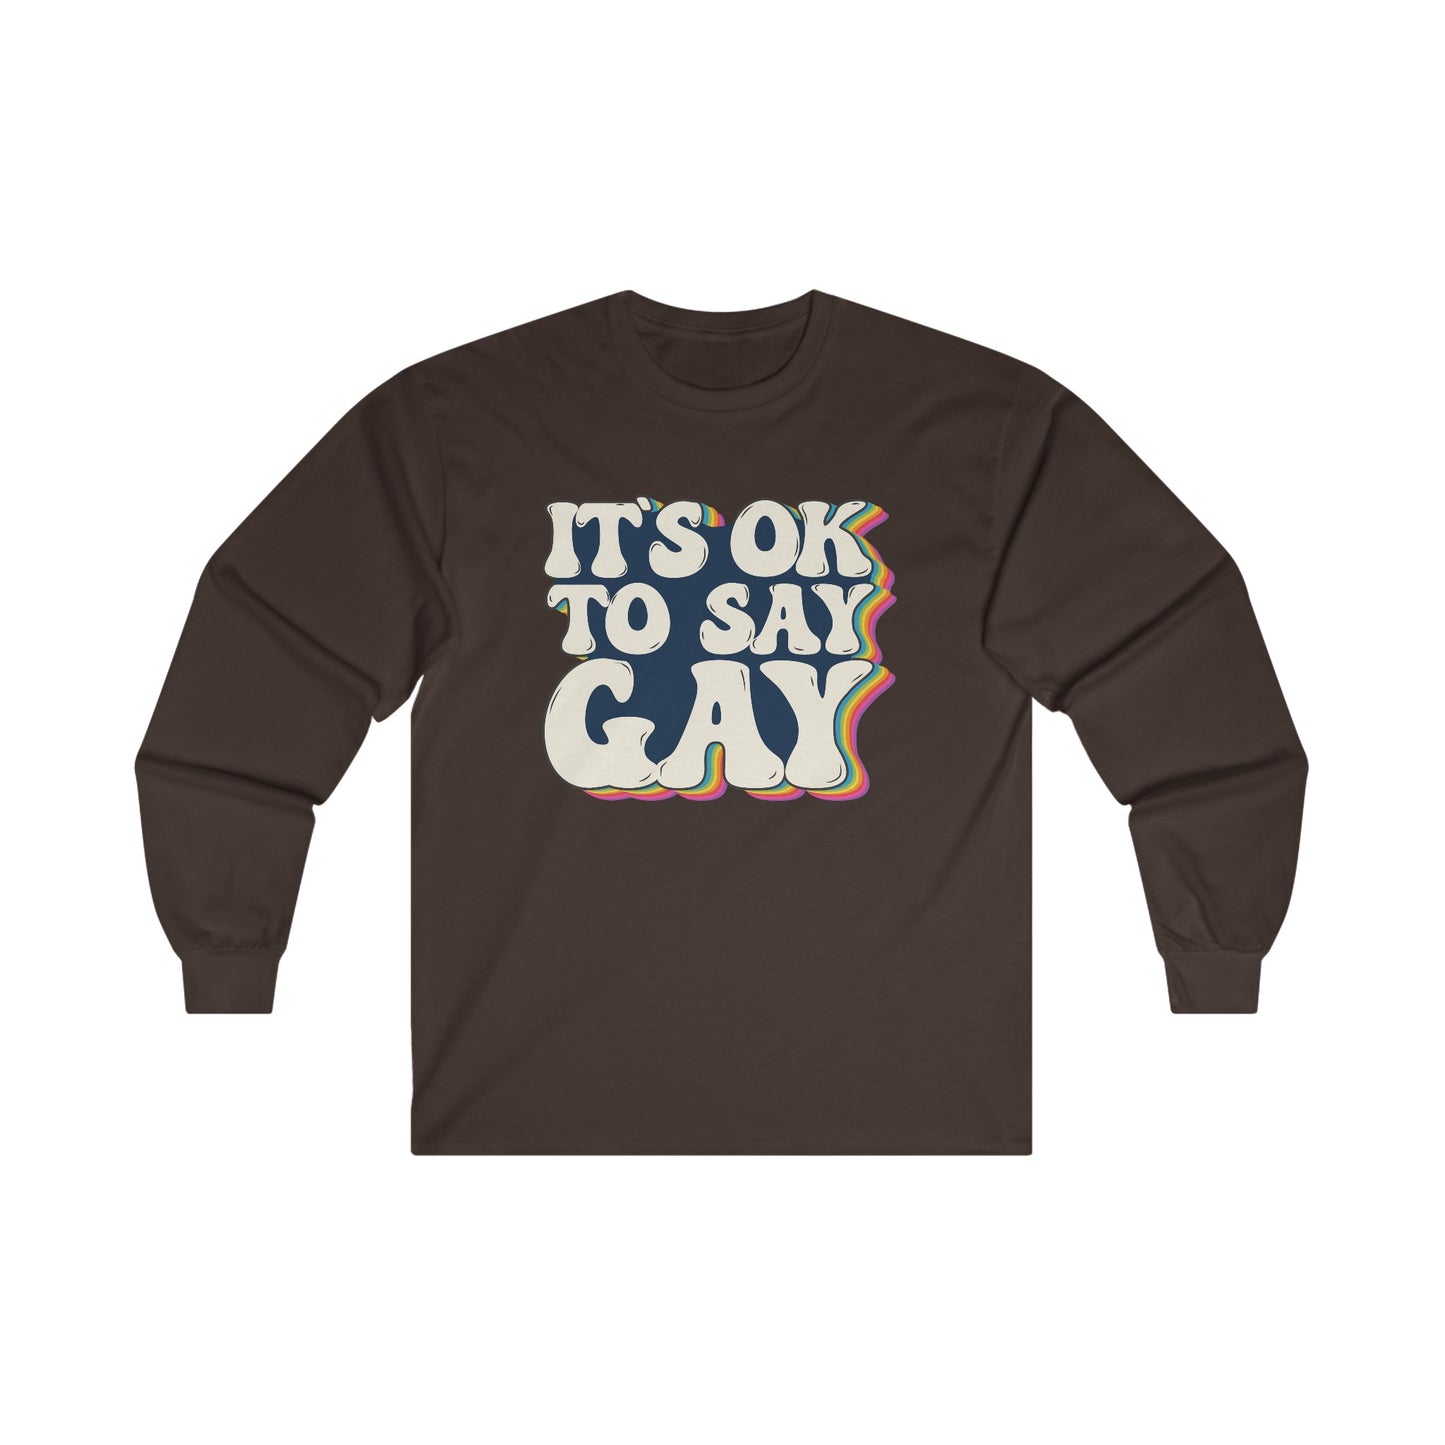 “It’s OK to Say Gay” Unisex Long Sleeve T-Shirt